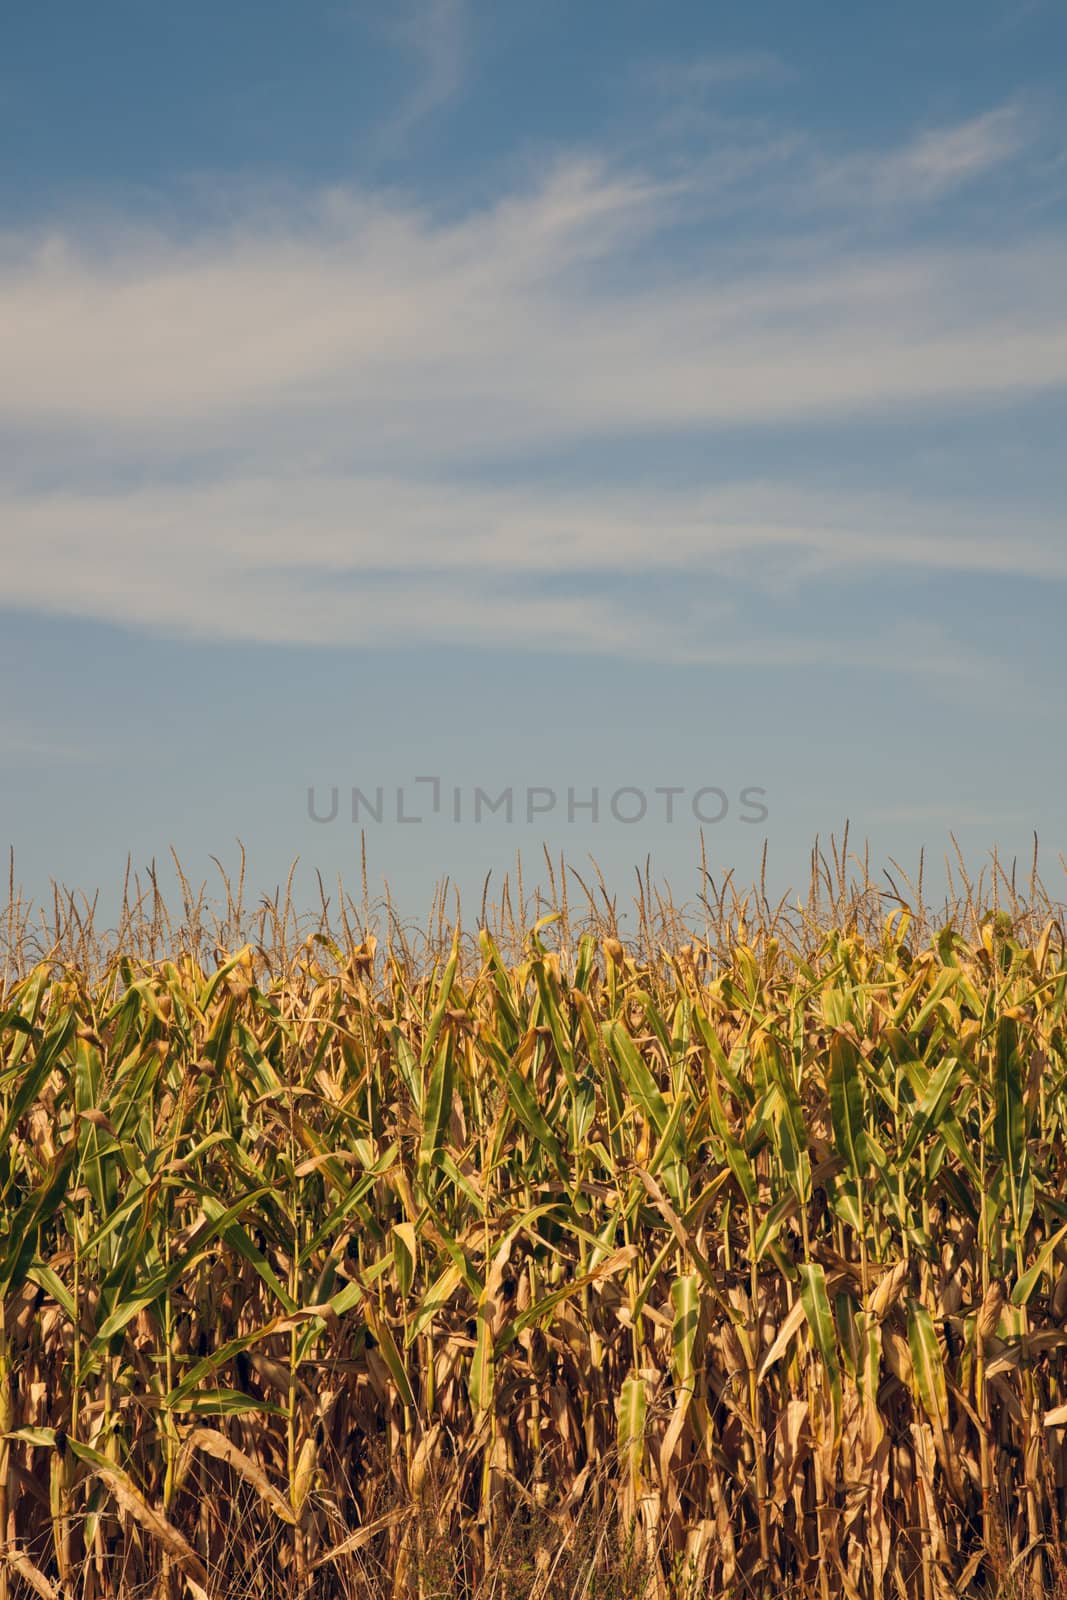 Corn field, summer time. Midwest, USA.